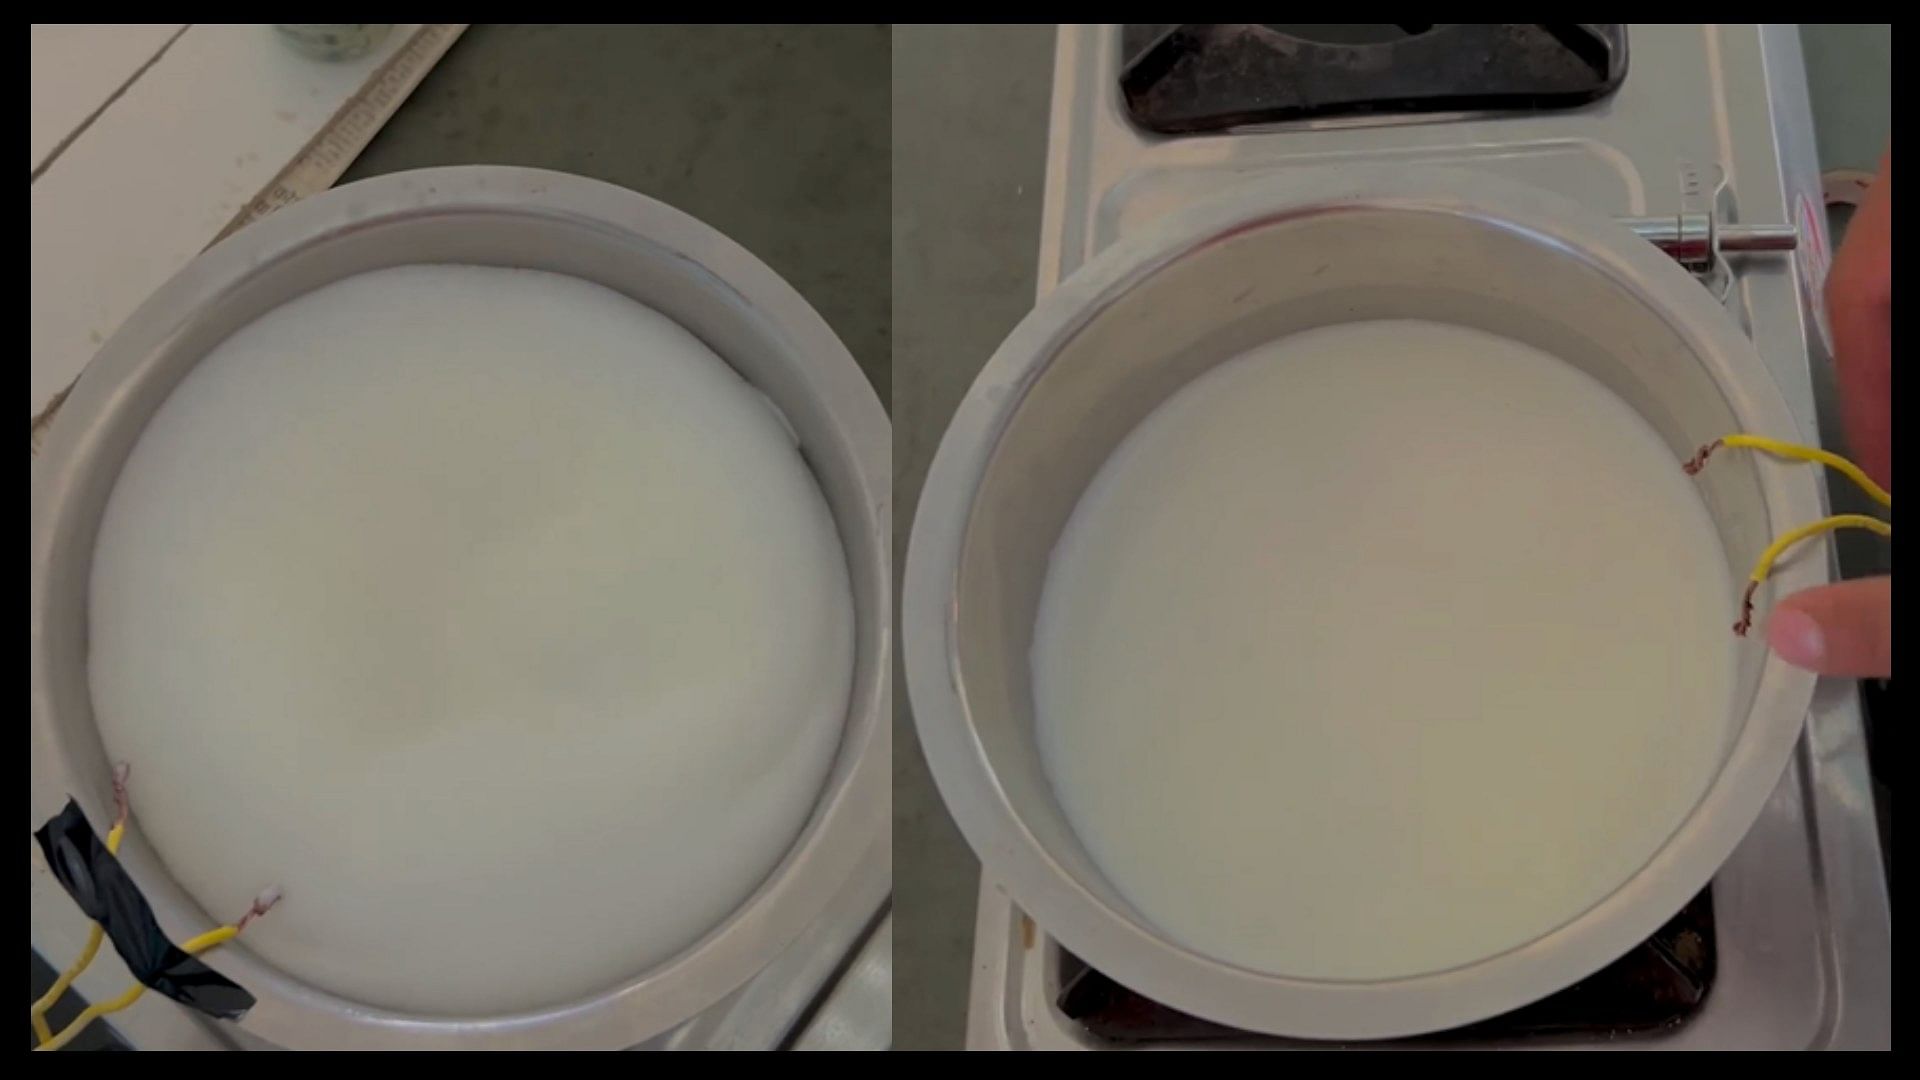 Boy uses water tank alarm amazing trick device to boil milk video viral on social media